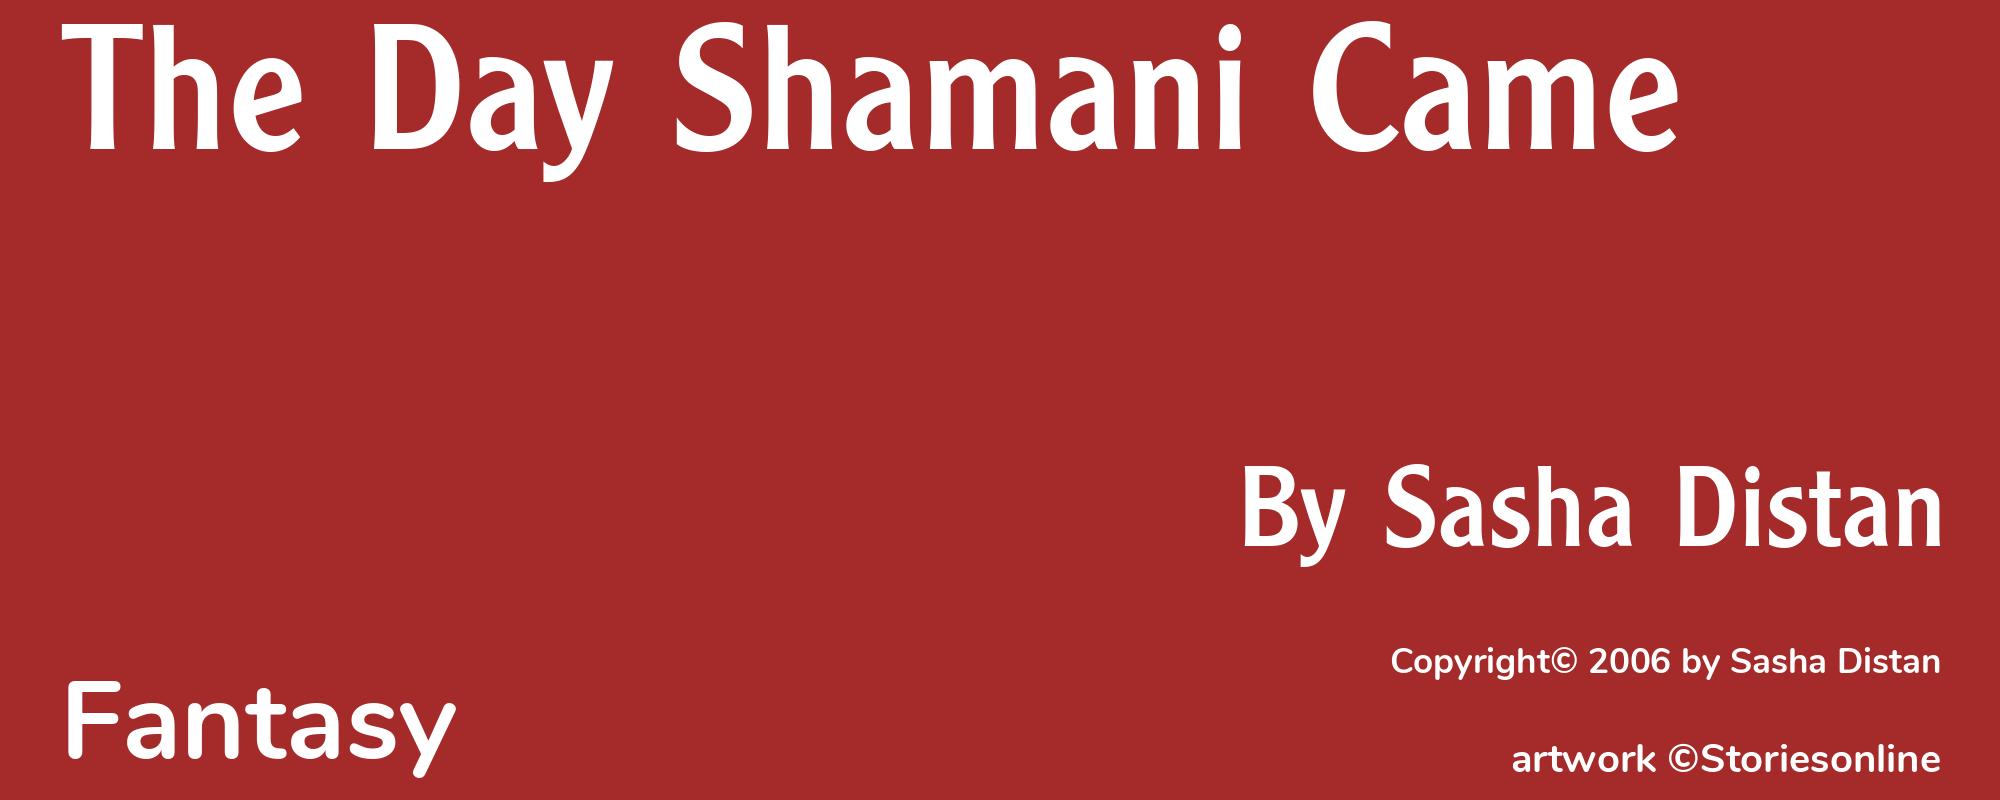 The Day Shamani Came - Cover